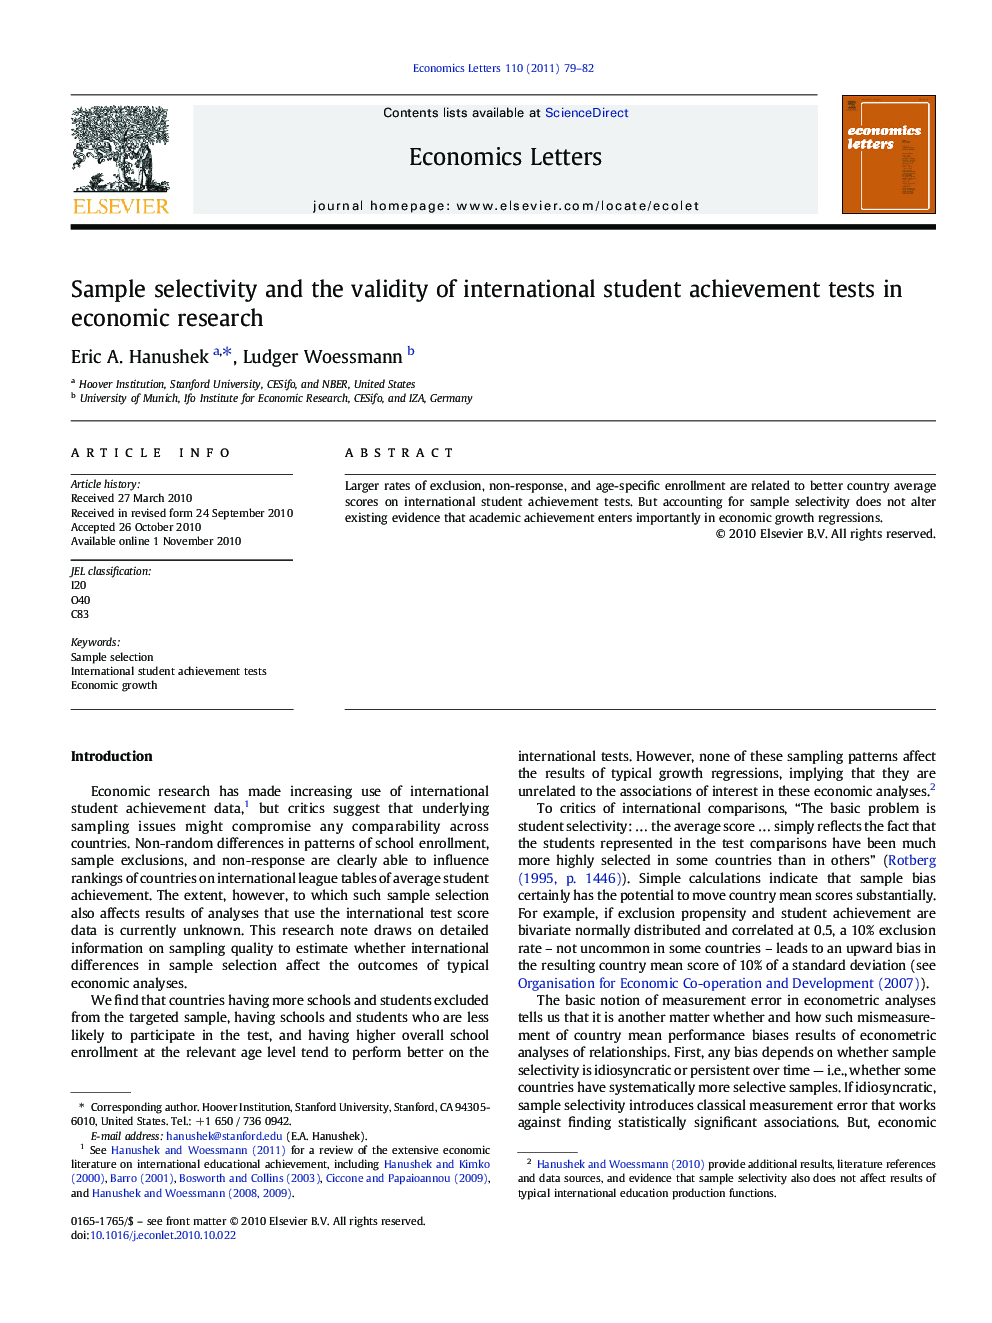 Sample selectivity and the validity of international student achievement tests in economic research